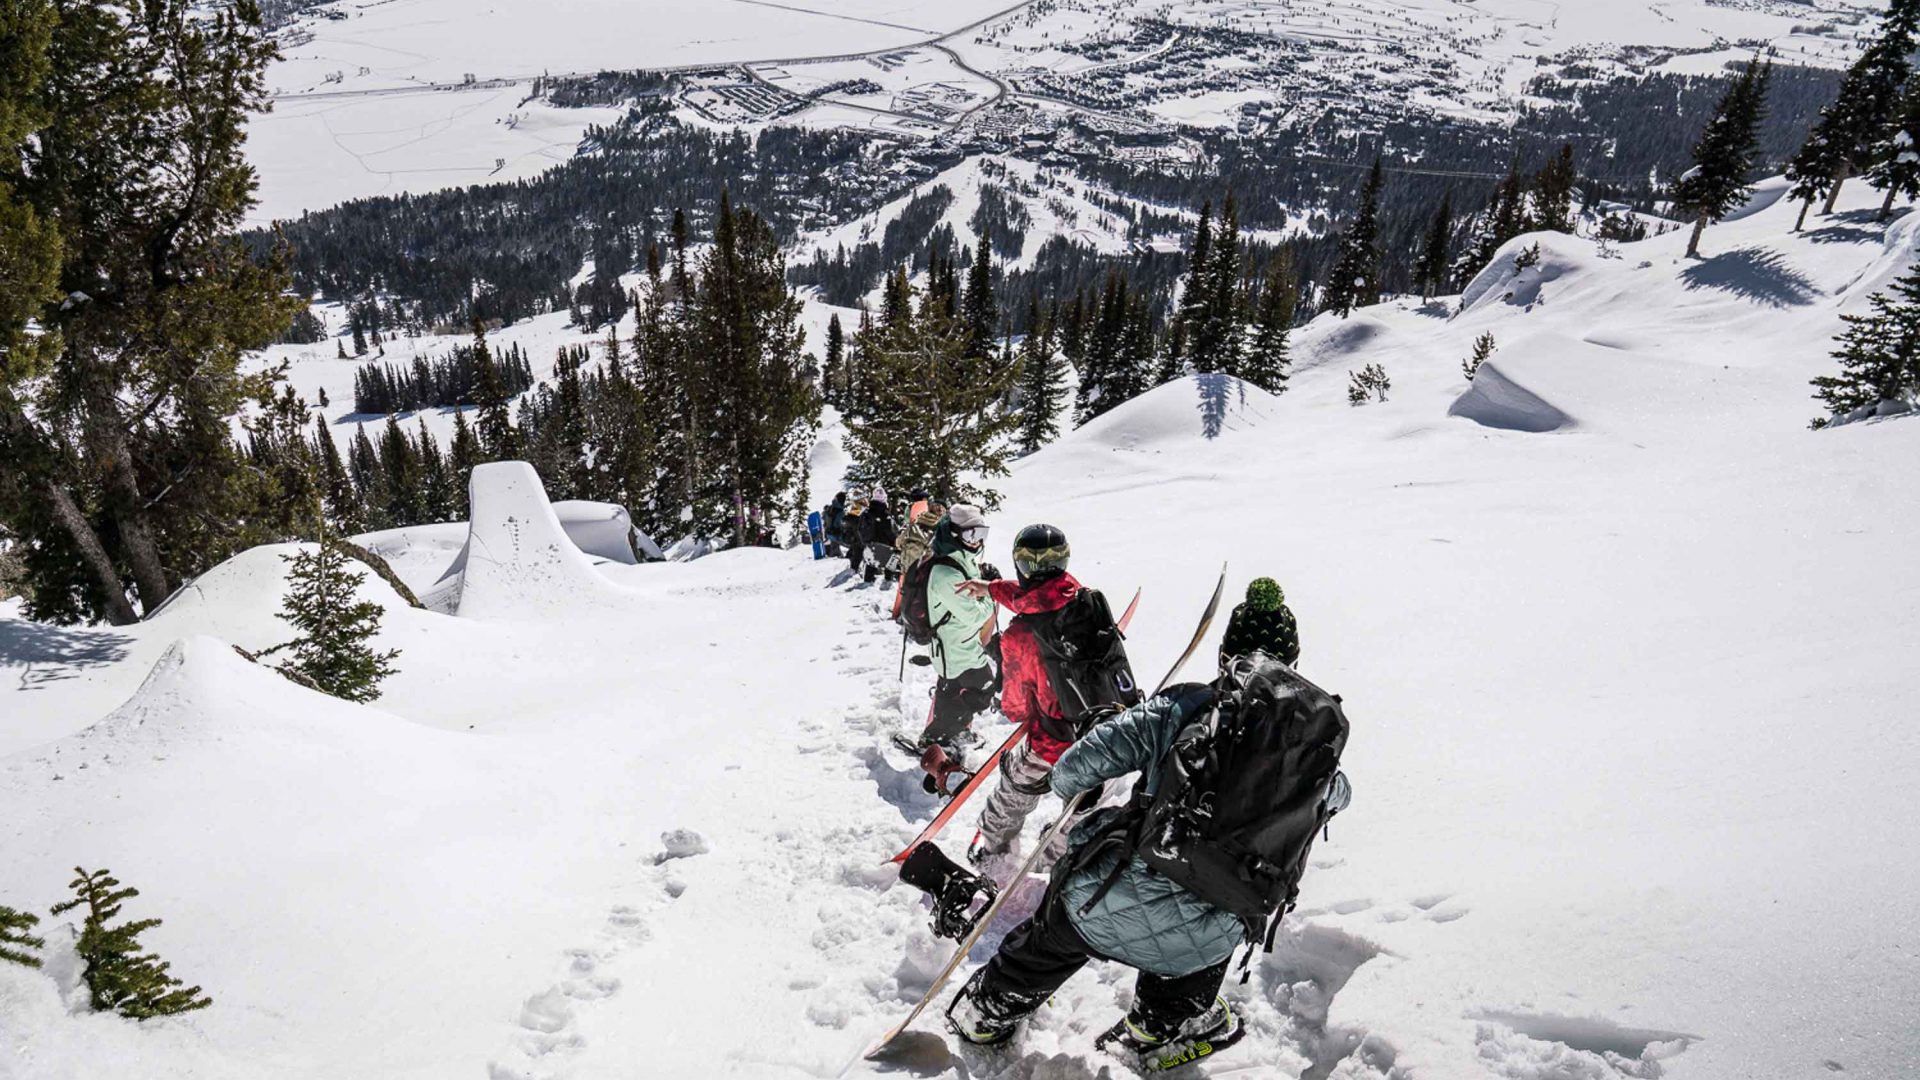 Skiers make their way single file across a hill.